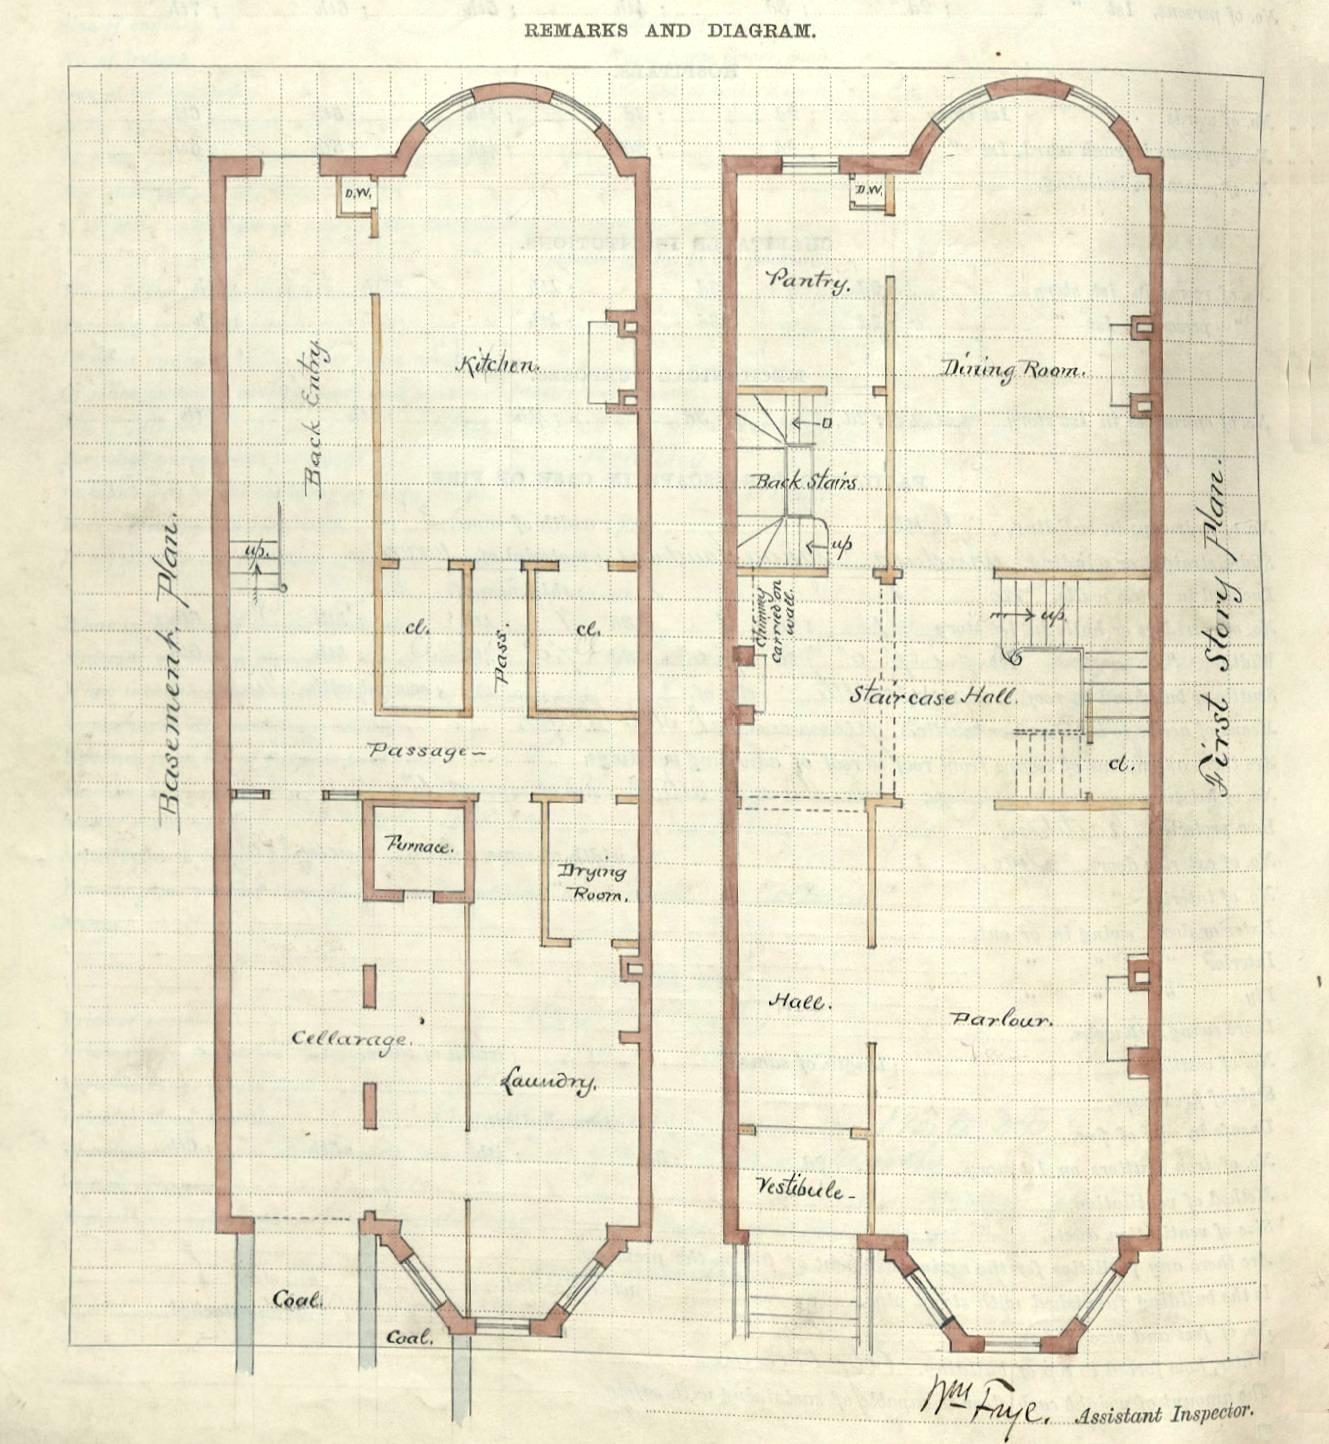 Samuel-d.-Kelley-architect-comm-252-basement-and-first-floor-plans-1880 - butler's pantry off the dining room